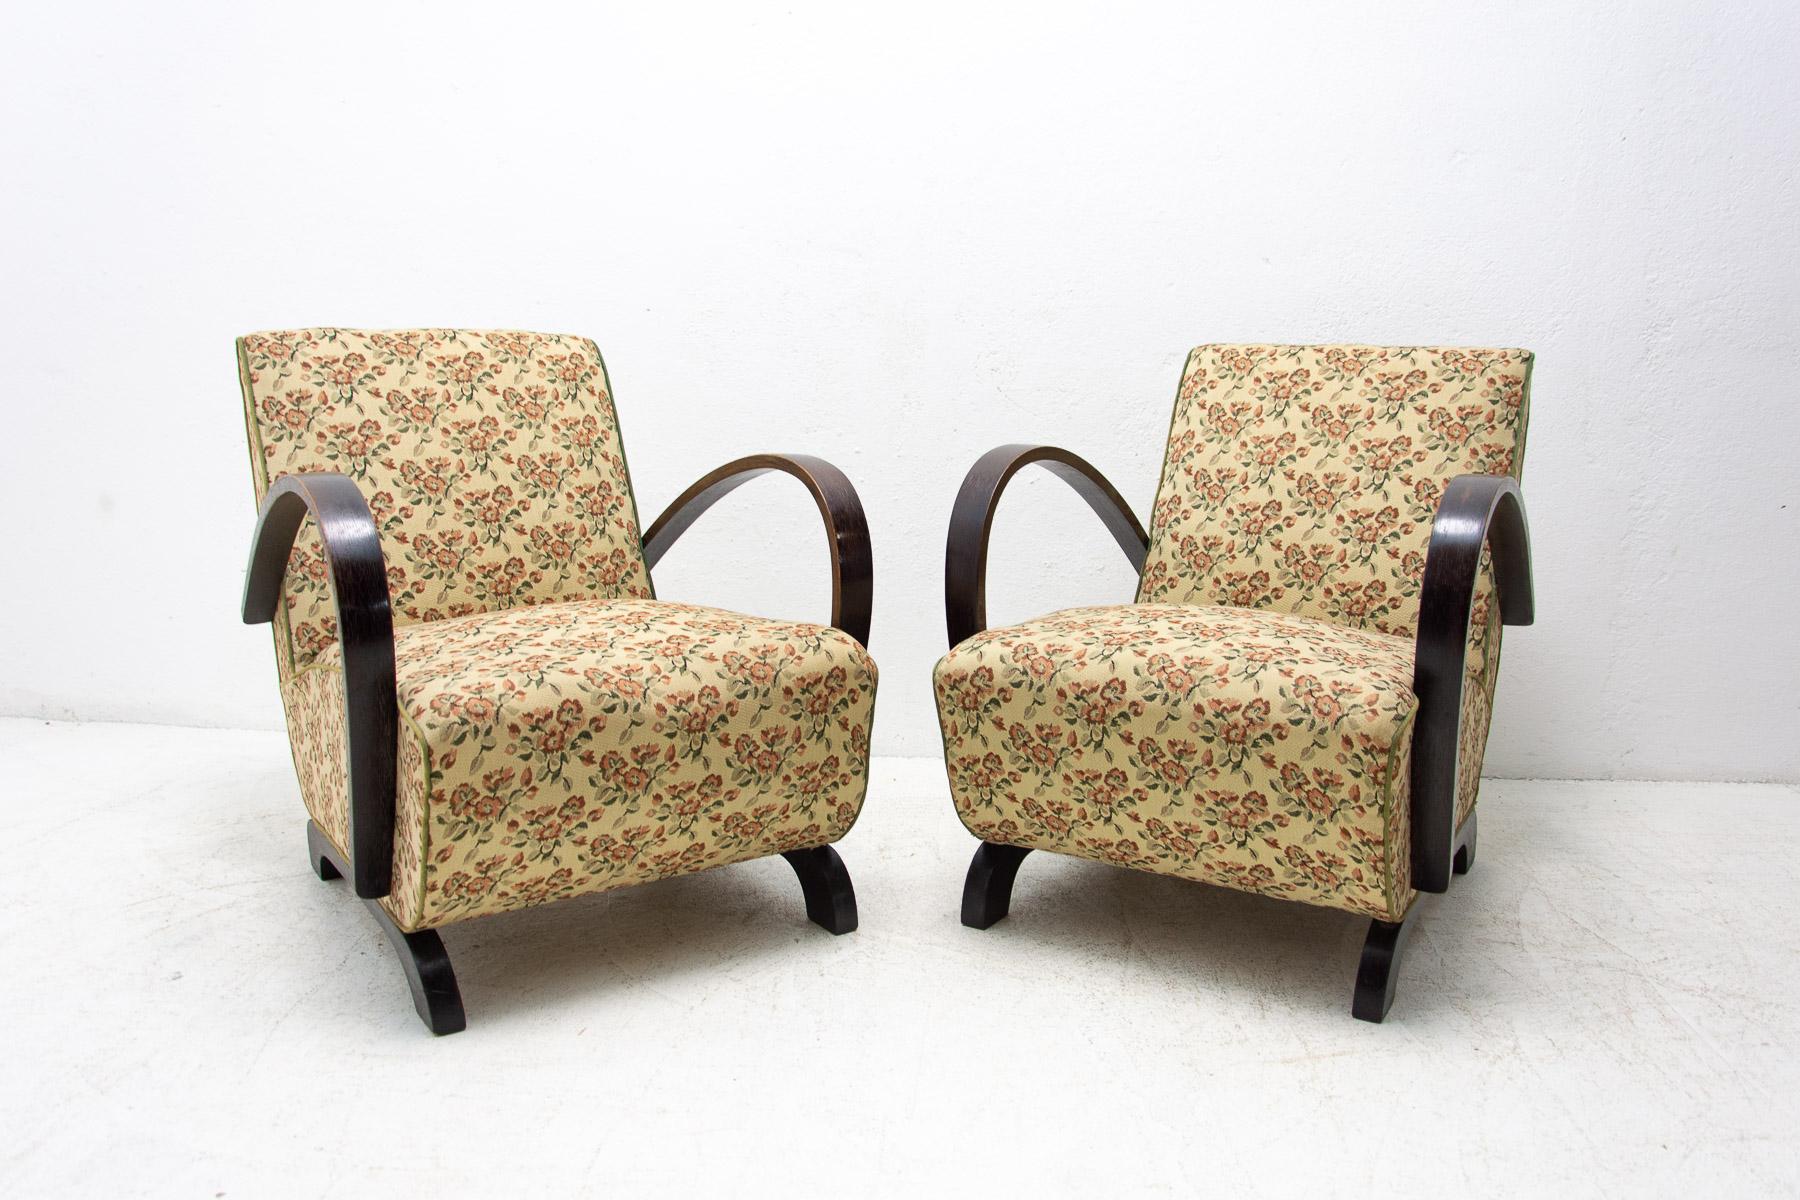 These rarely seen bentwood armchairs “C” was designed by Jindrich Halabala and were made in the 1950´s. The chairs are stable and comfortable, the wood is in good Vintage condition and the upholstery as well. Showing slight signs of age and using.